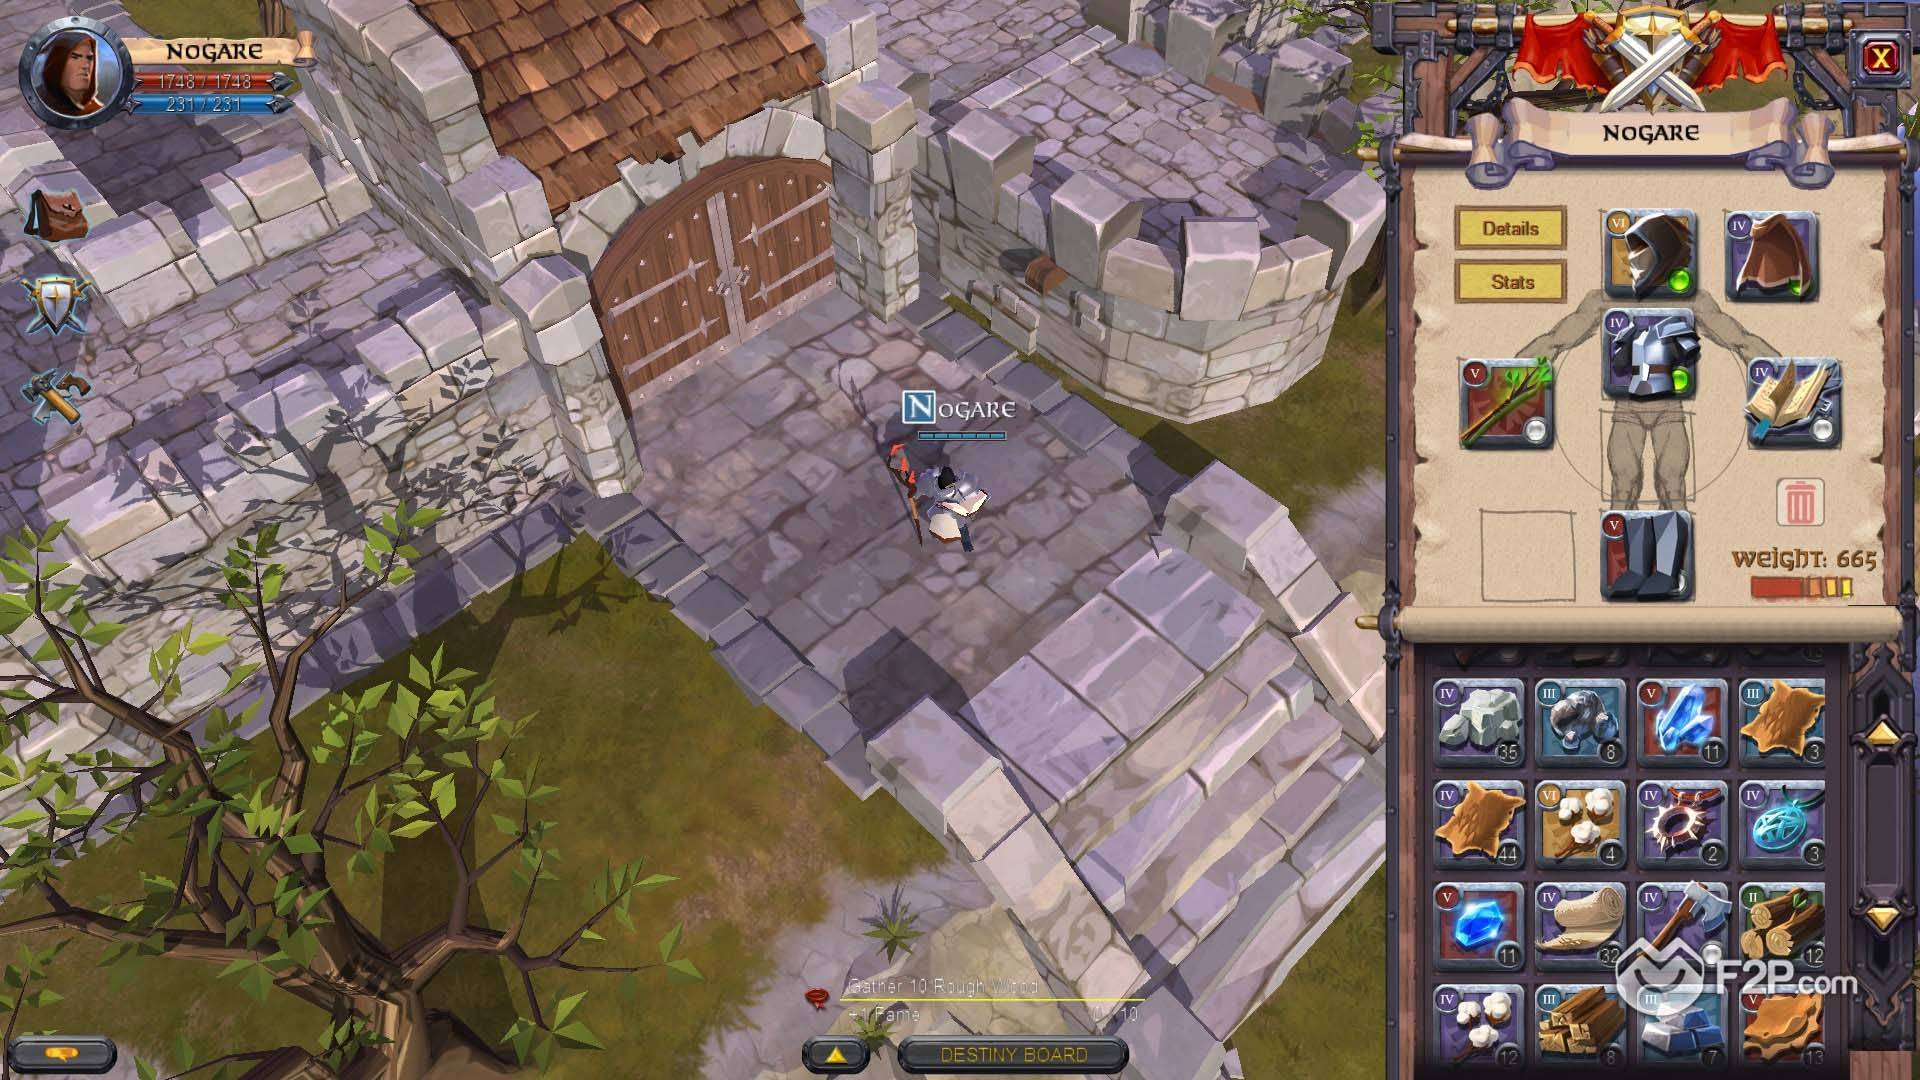 Albion Online Mobile review: Experience a classic old school